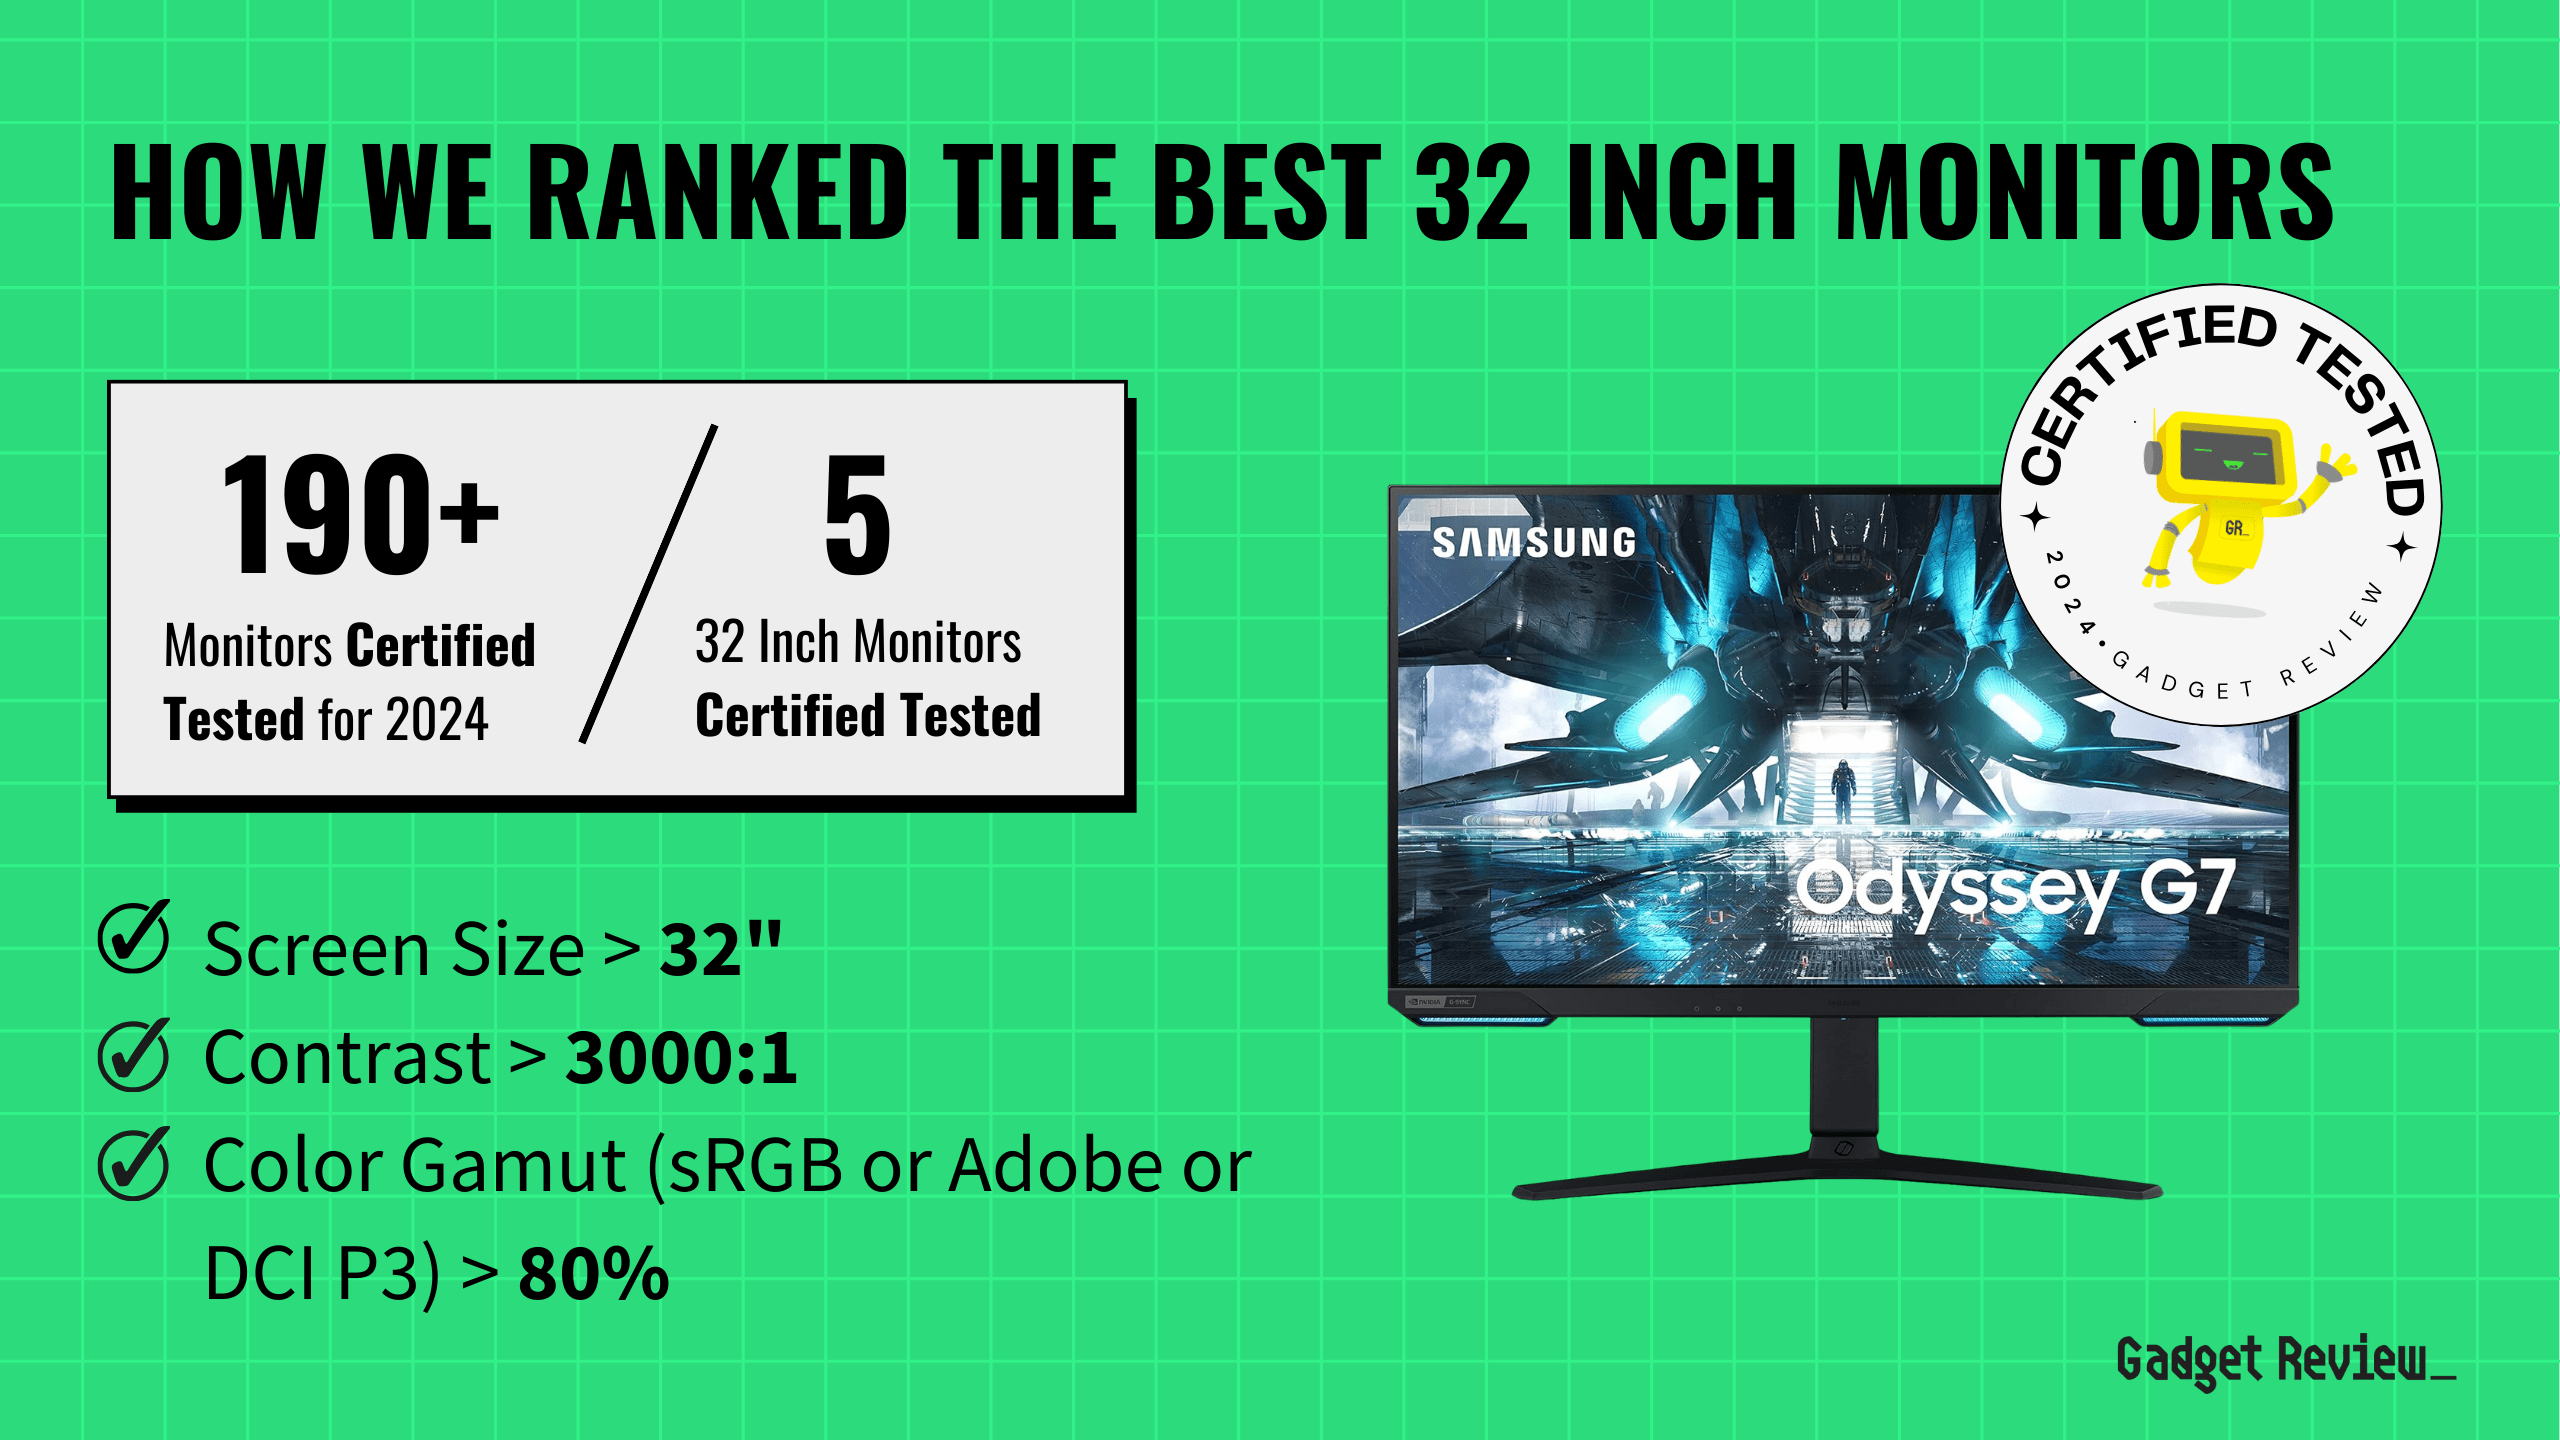 What’s the Best 32 Inch Monitor? 5 Options Ranked